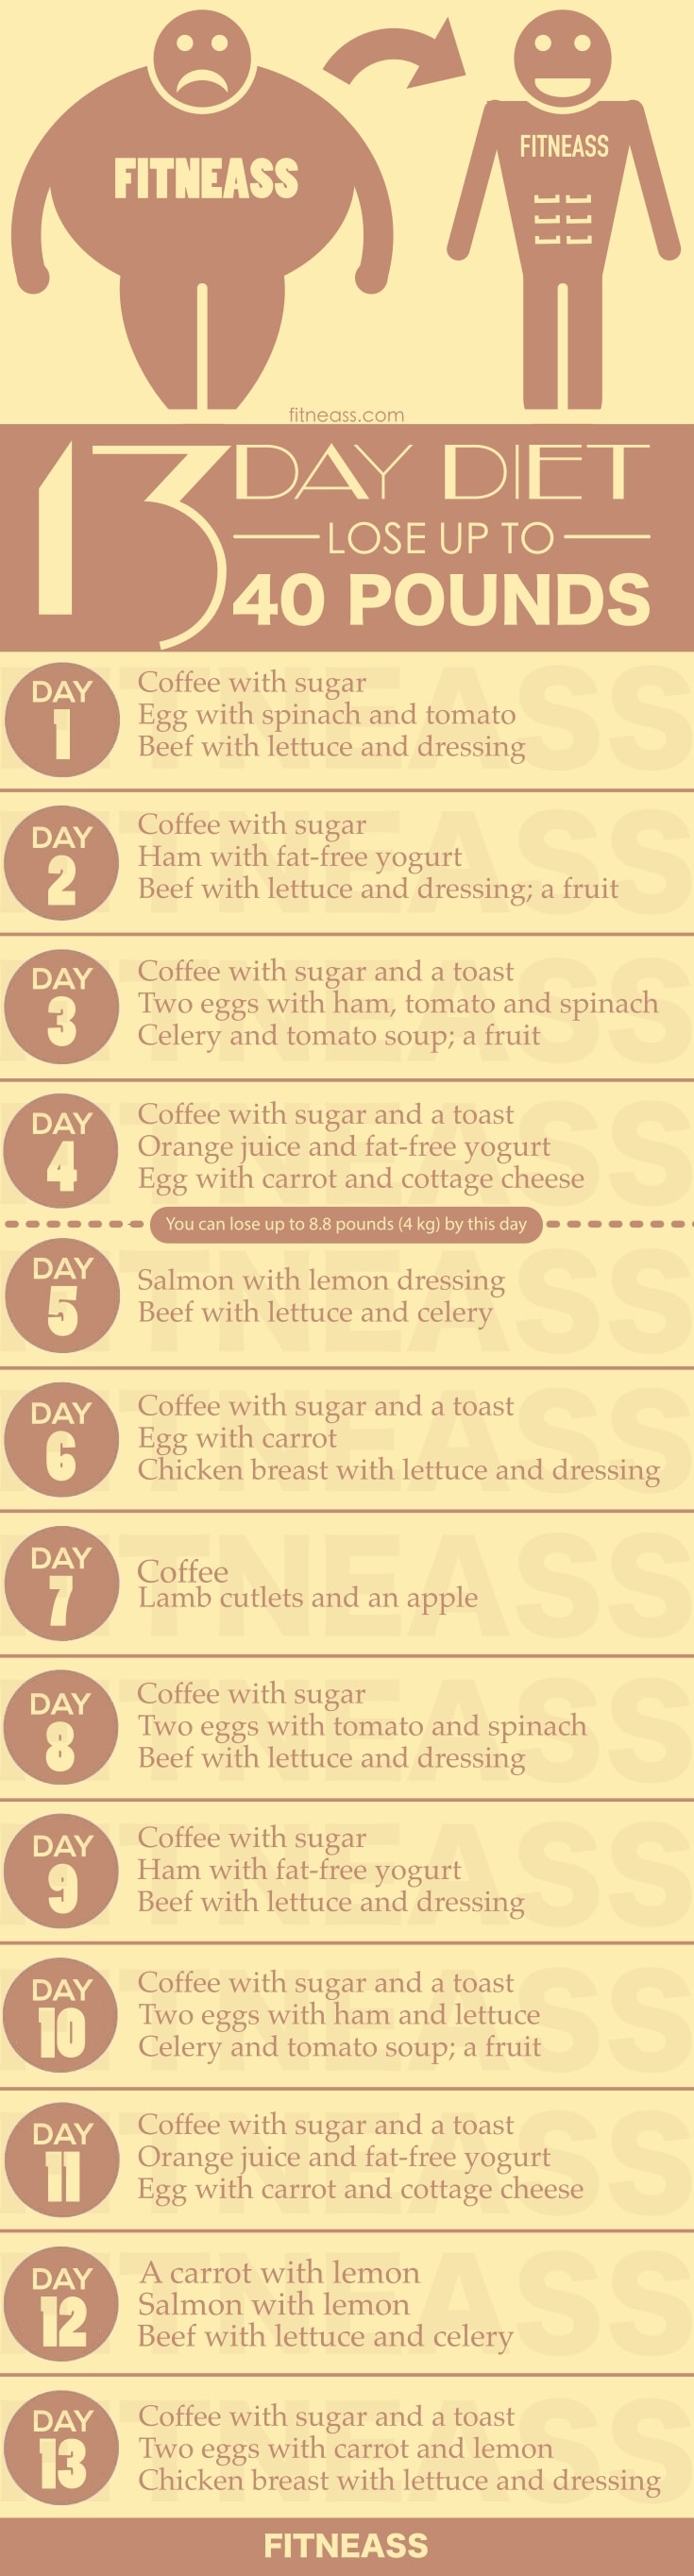 13-Day Diet To Lose Up To 40 Pounds